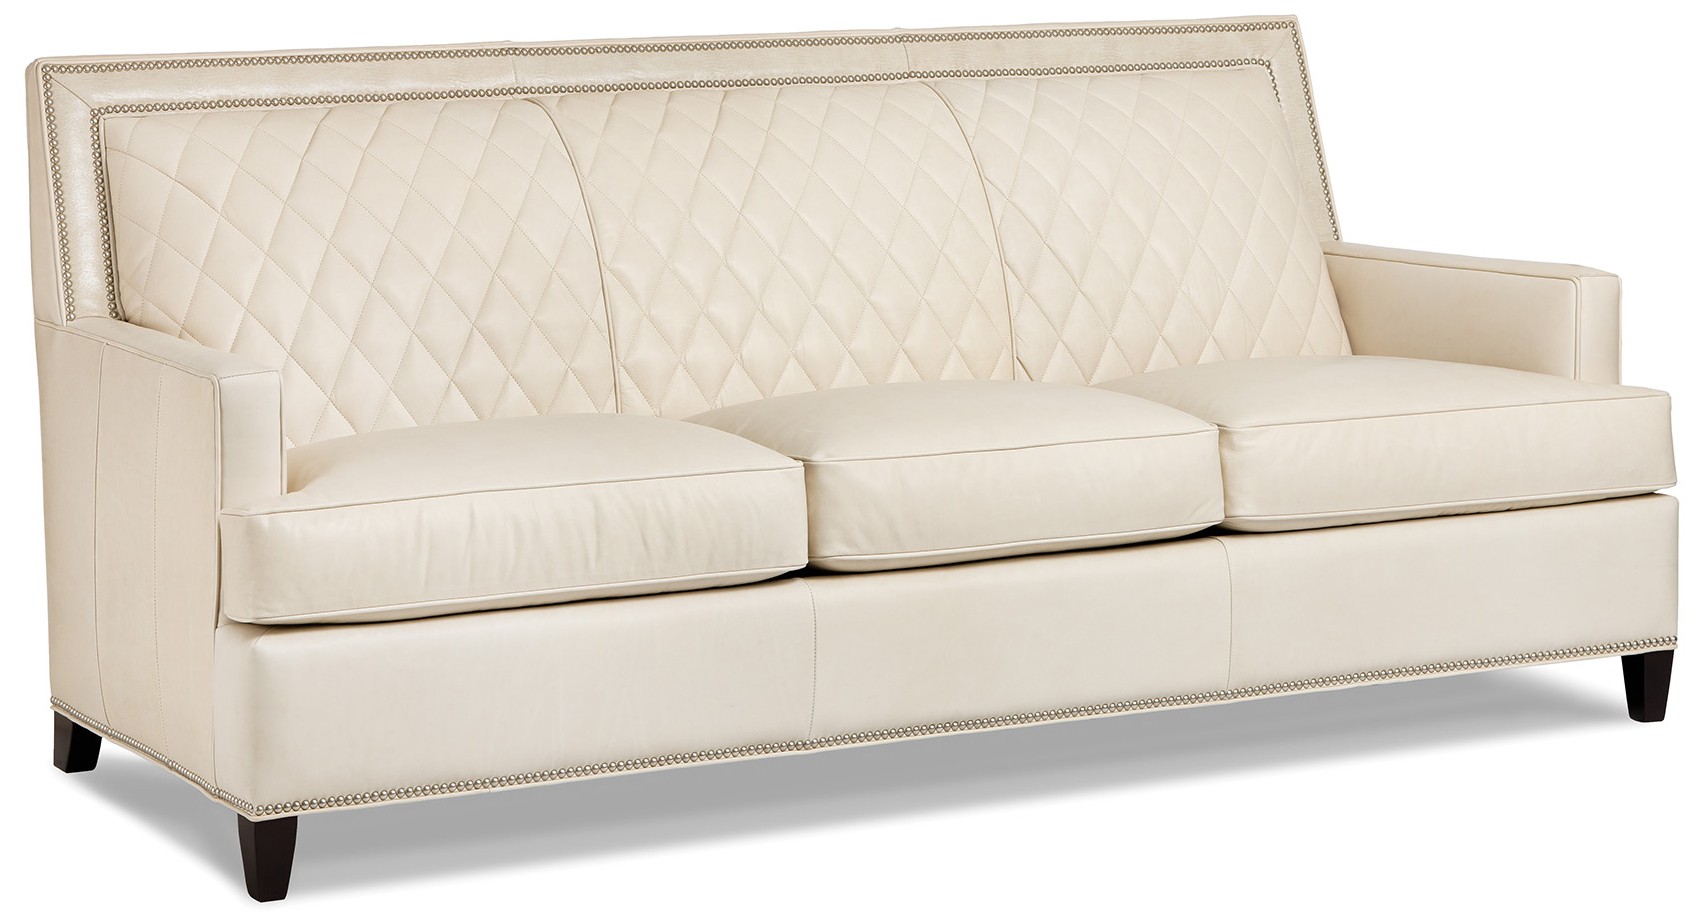 century quilted leather sofa